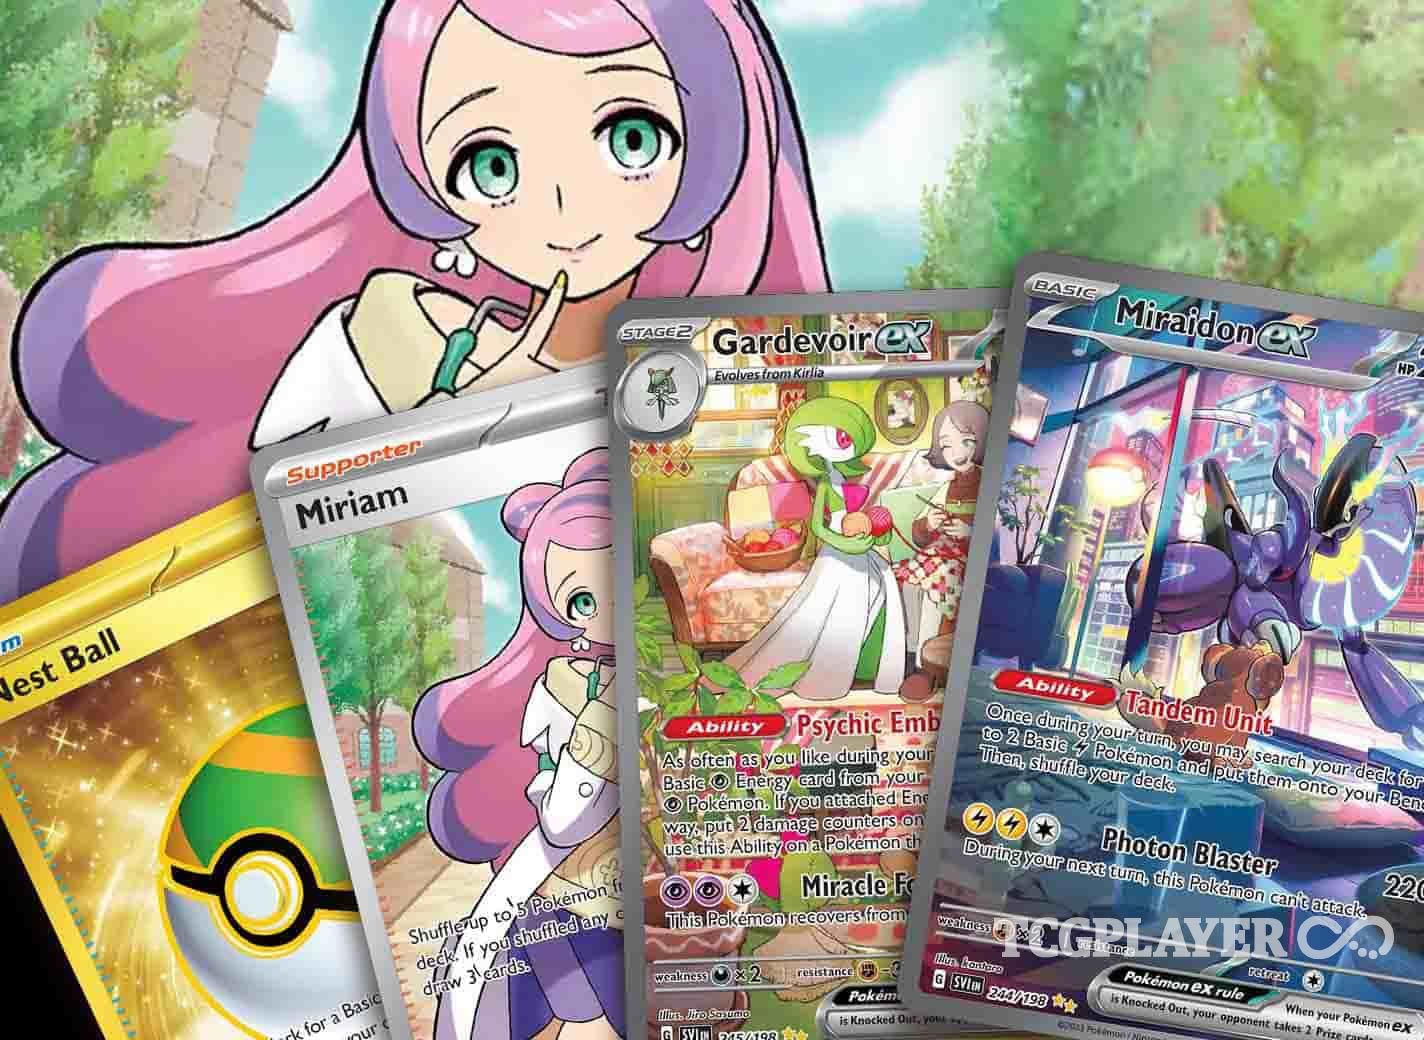 Pokemon TCG: The 10 Most Valuable Cards From Base Set